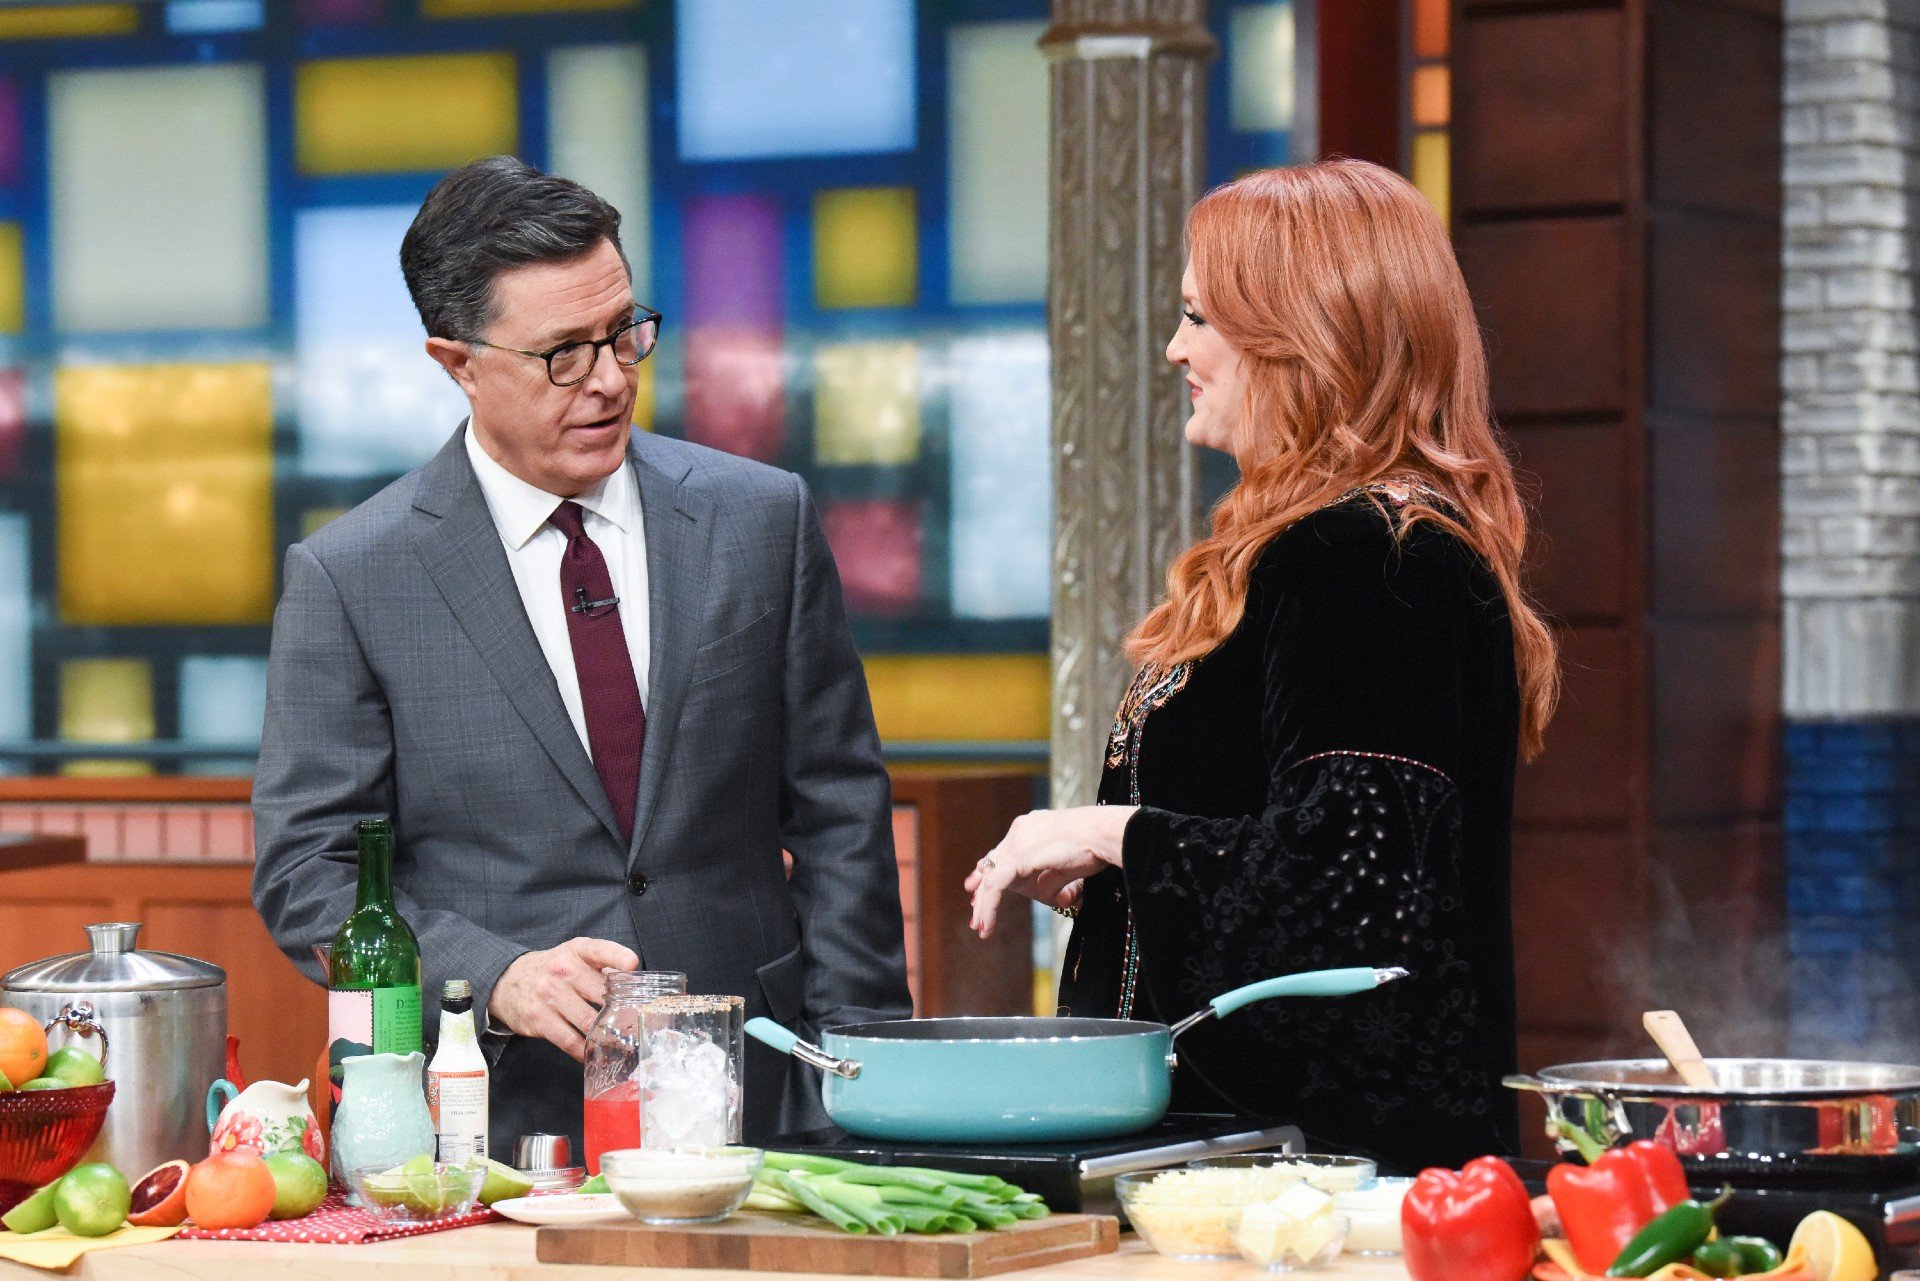 The Pioneer Woman Ree Drummond does a cooking demonstration with Stephen Colbert.